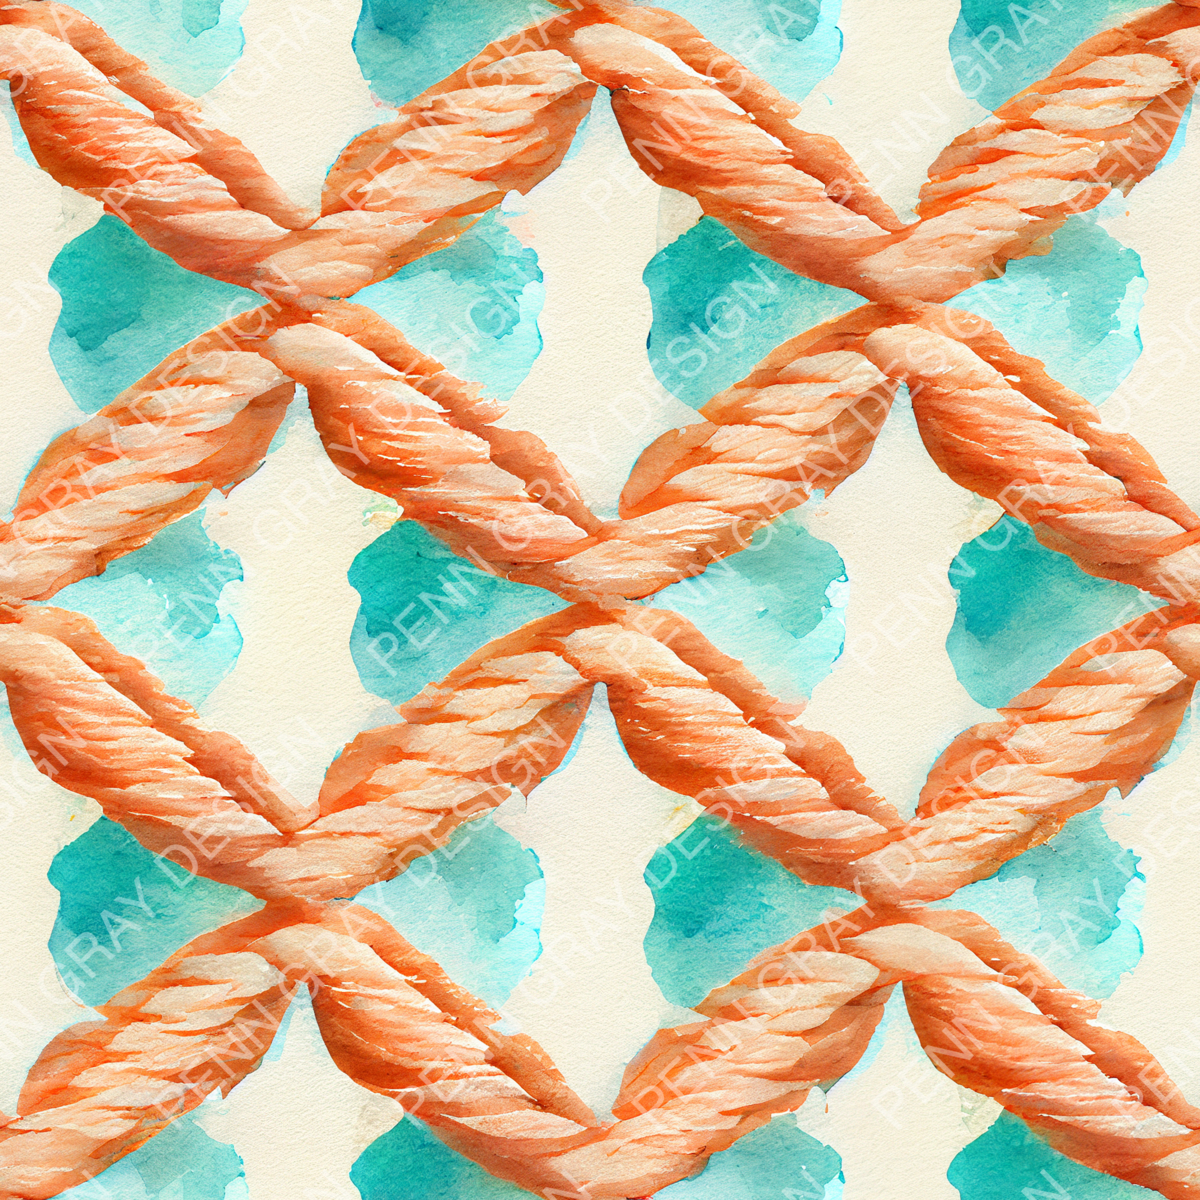 ropes-anchors-02-(watermarked)